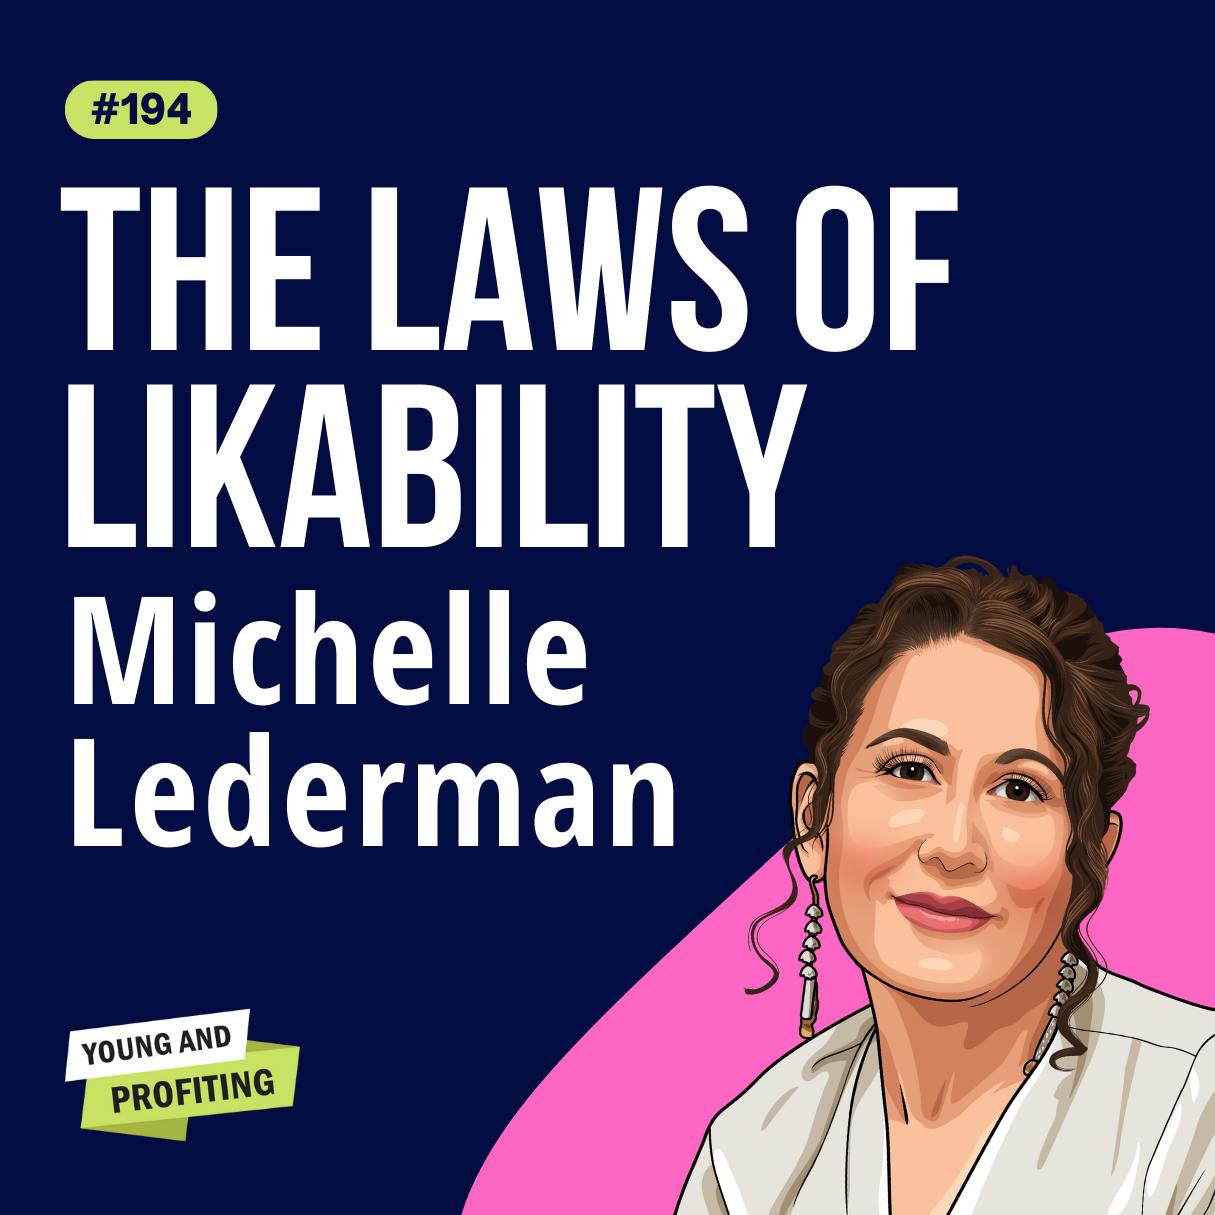 Michelle Lederman: Grow Your Network and Influence with the 11 Laws of Likability | E194